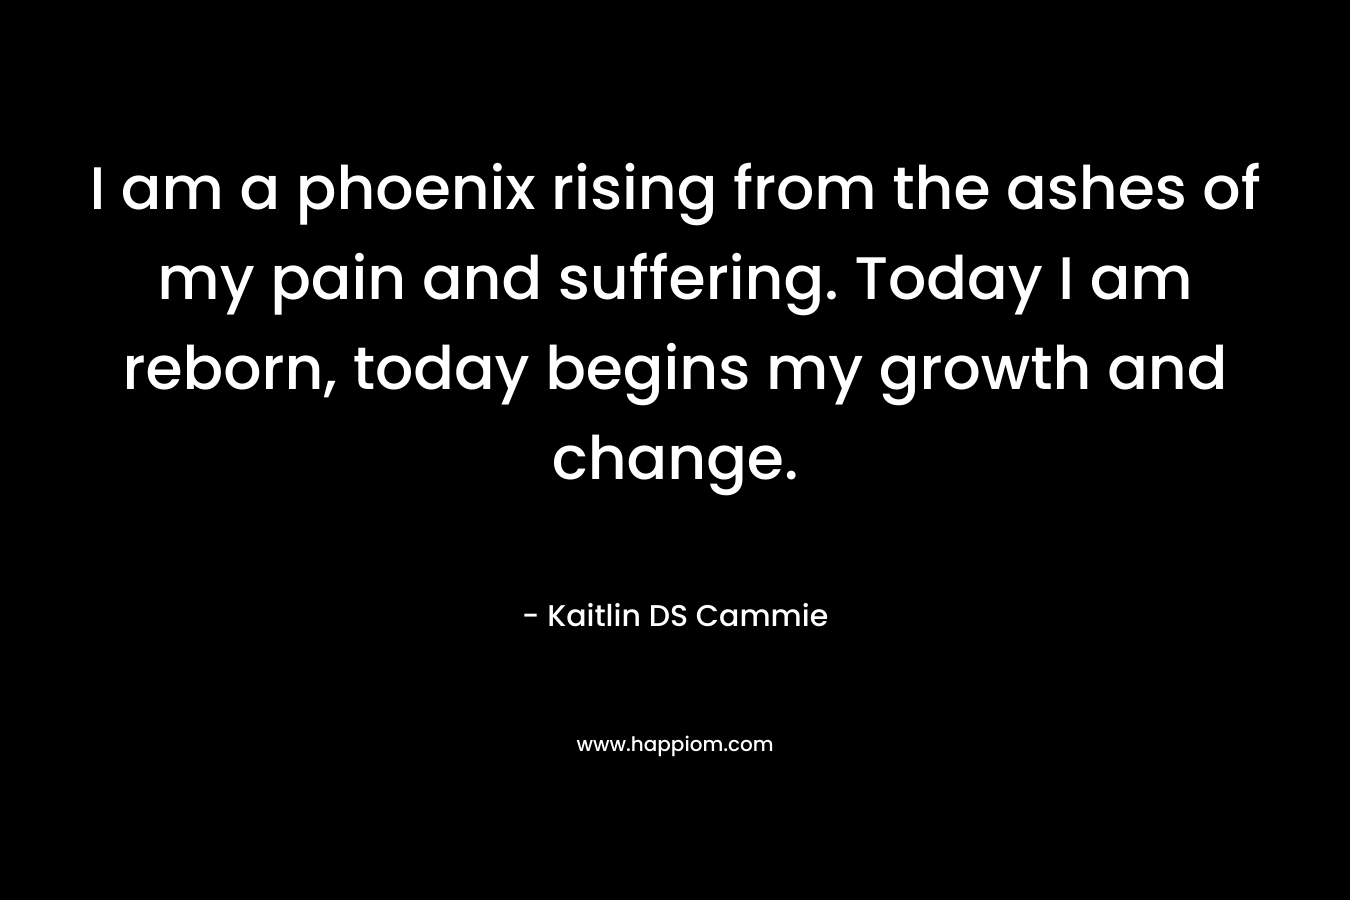 I am a phoenix rising from the ashes of my pain and suffering. Today I am reborn, today begins my growth and change. – Kaitlin DS Cammie